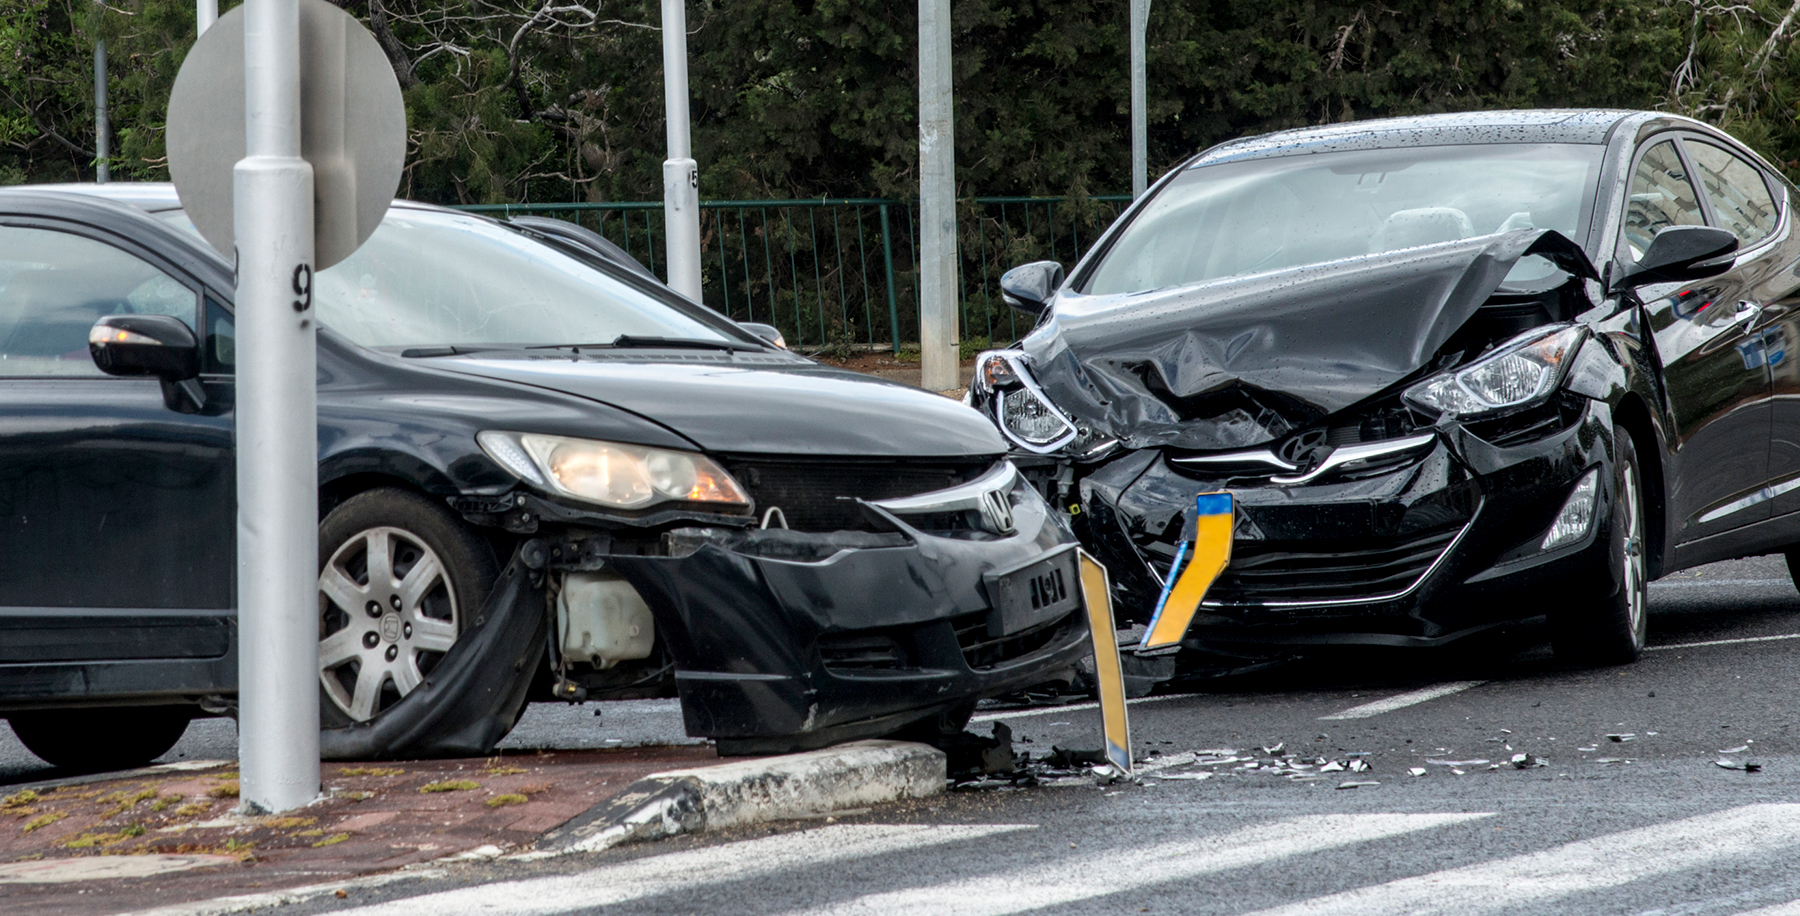 Ways in Which Motorists Can Be Negligent and Contribute to a Multiple-Vehicle Accident